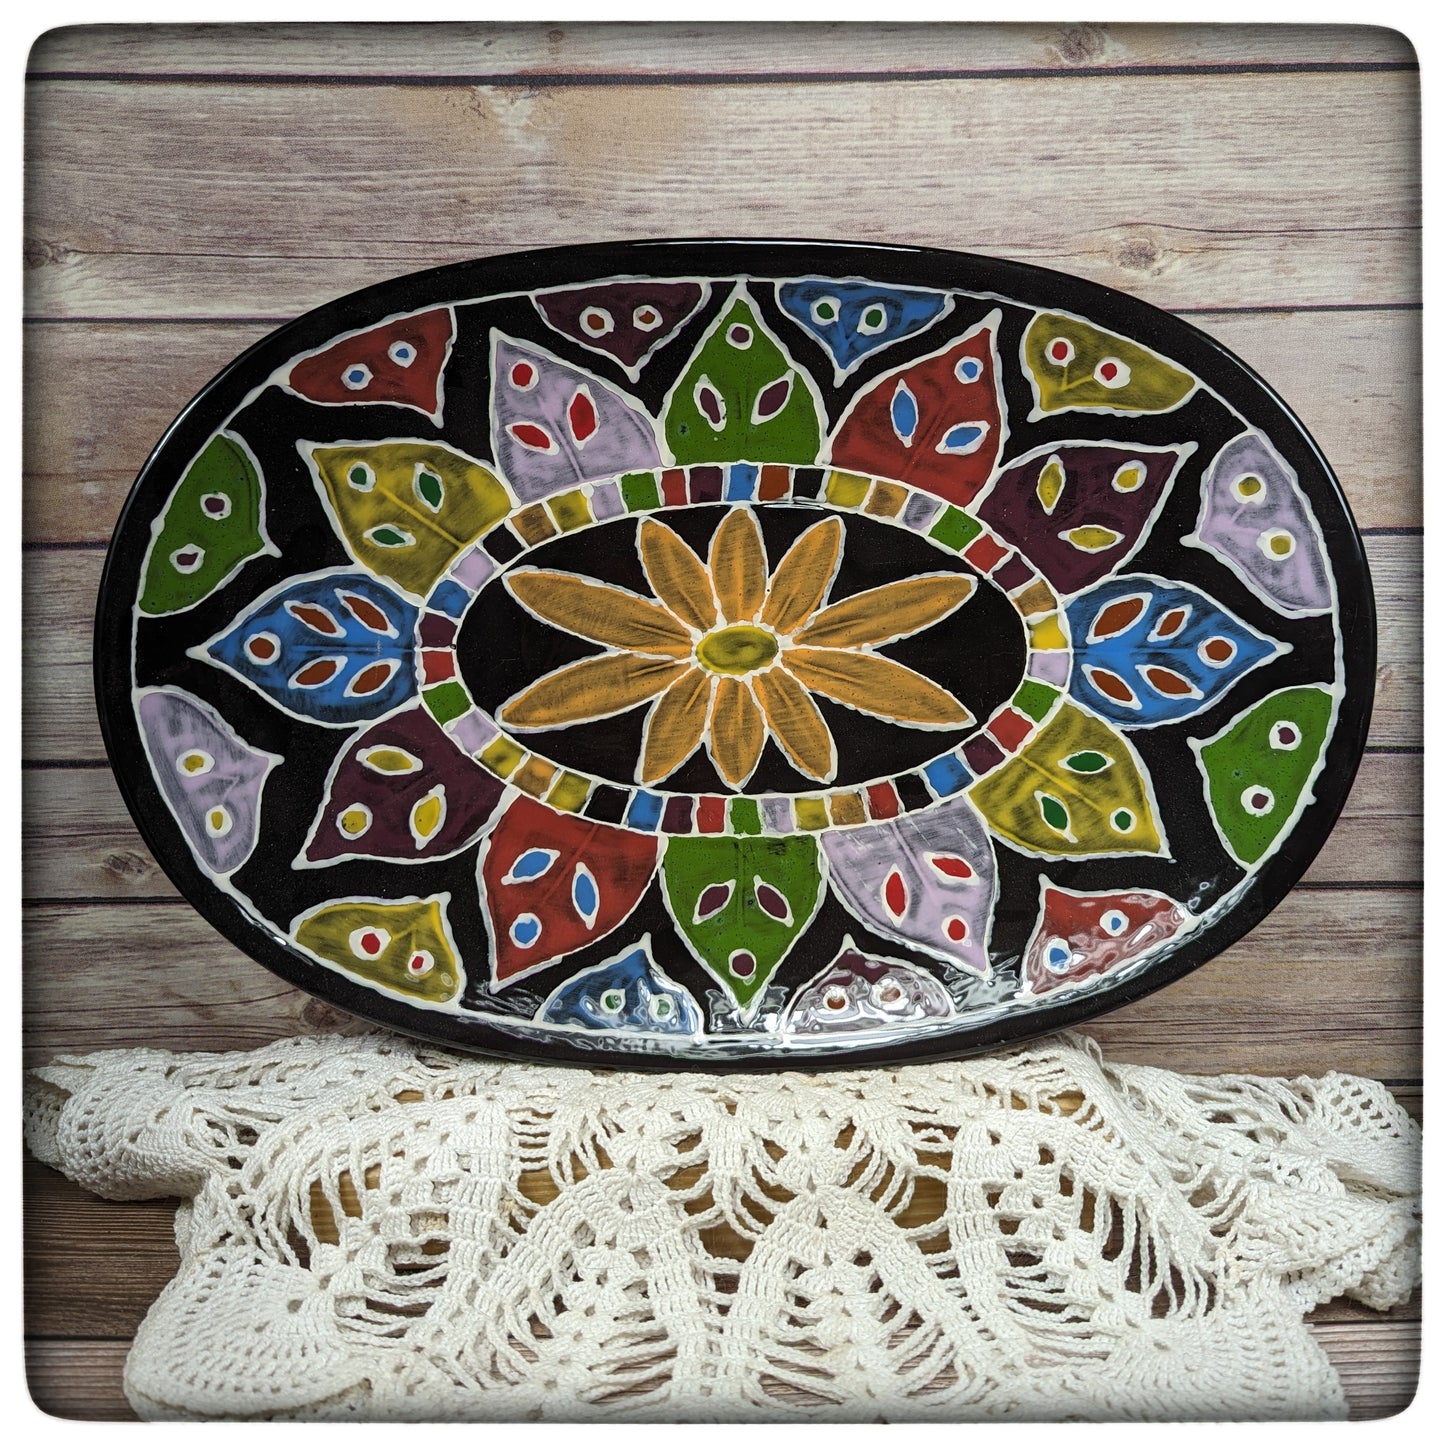 Colorful serving tray